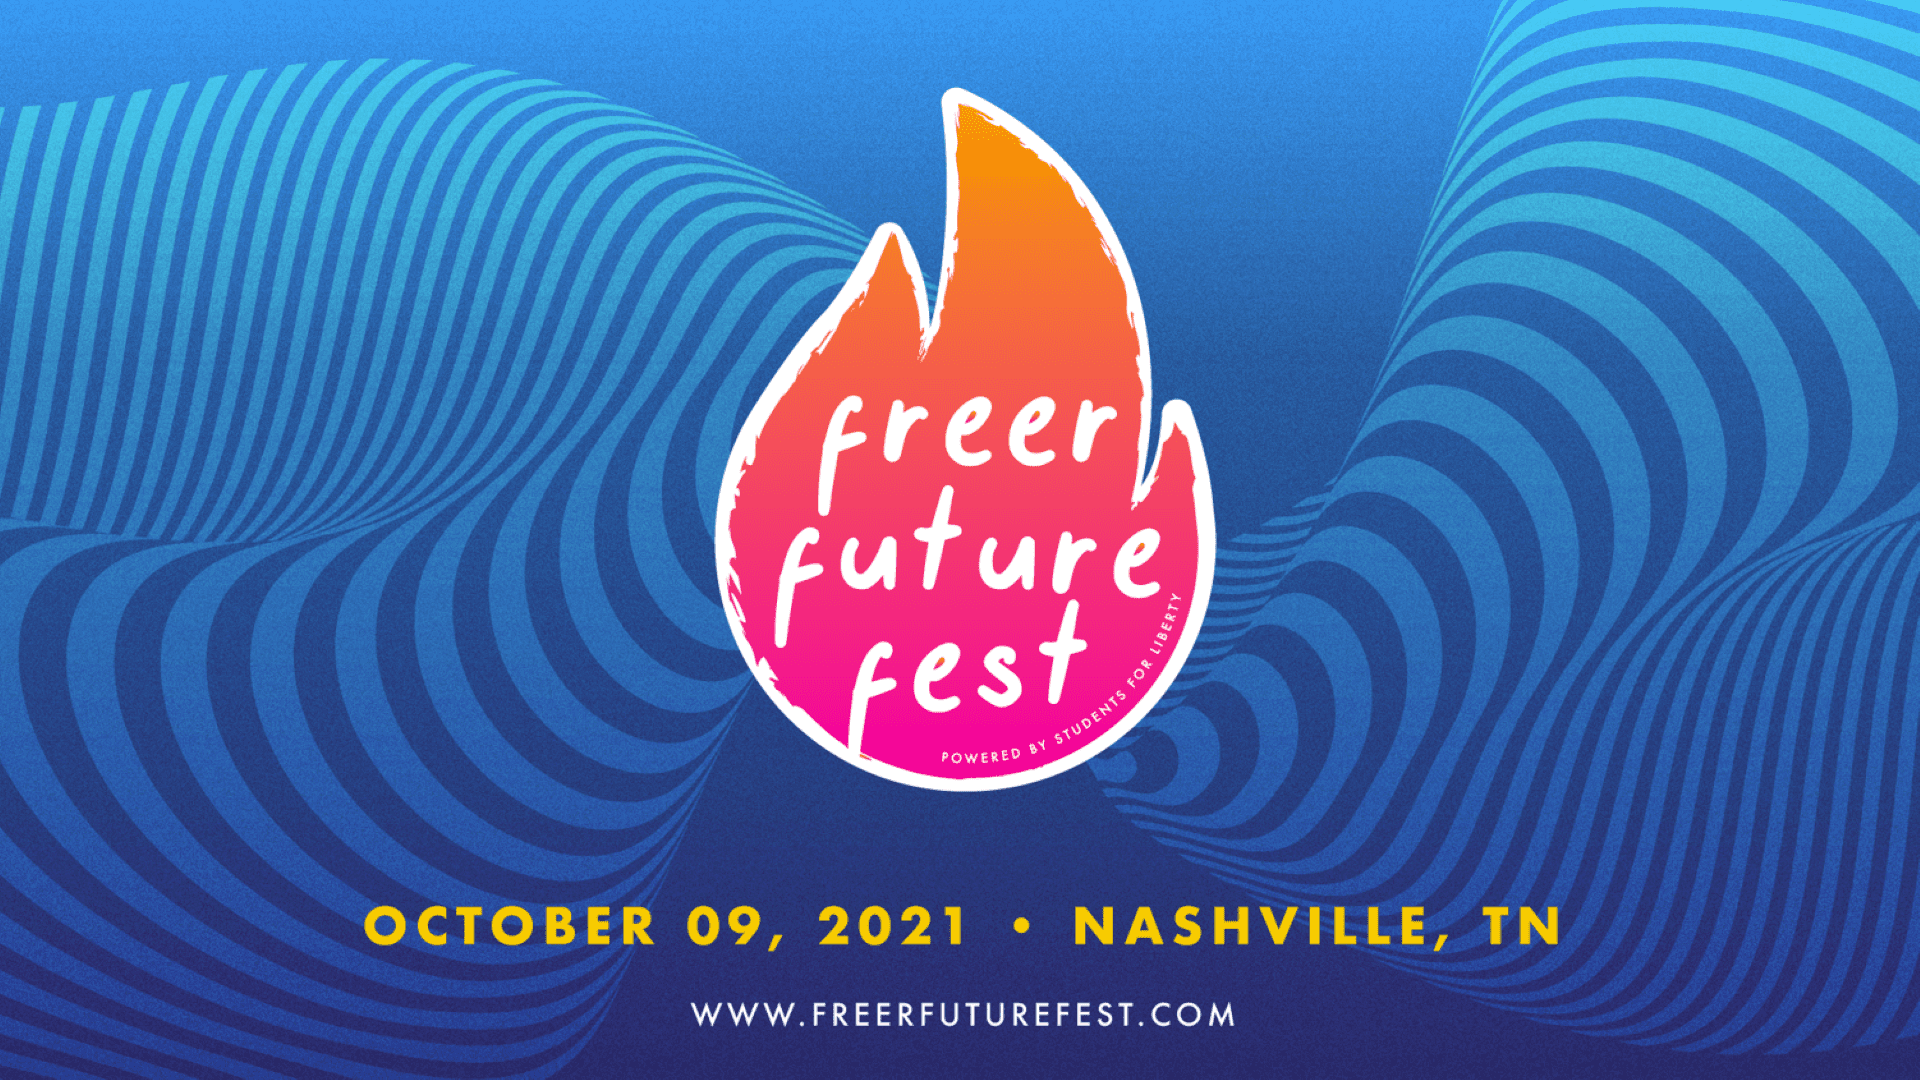 Still undecided on whether or not to register? Here are five great reasons why you definitely do not want to miss Freer Future Fest!